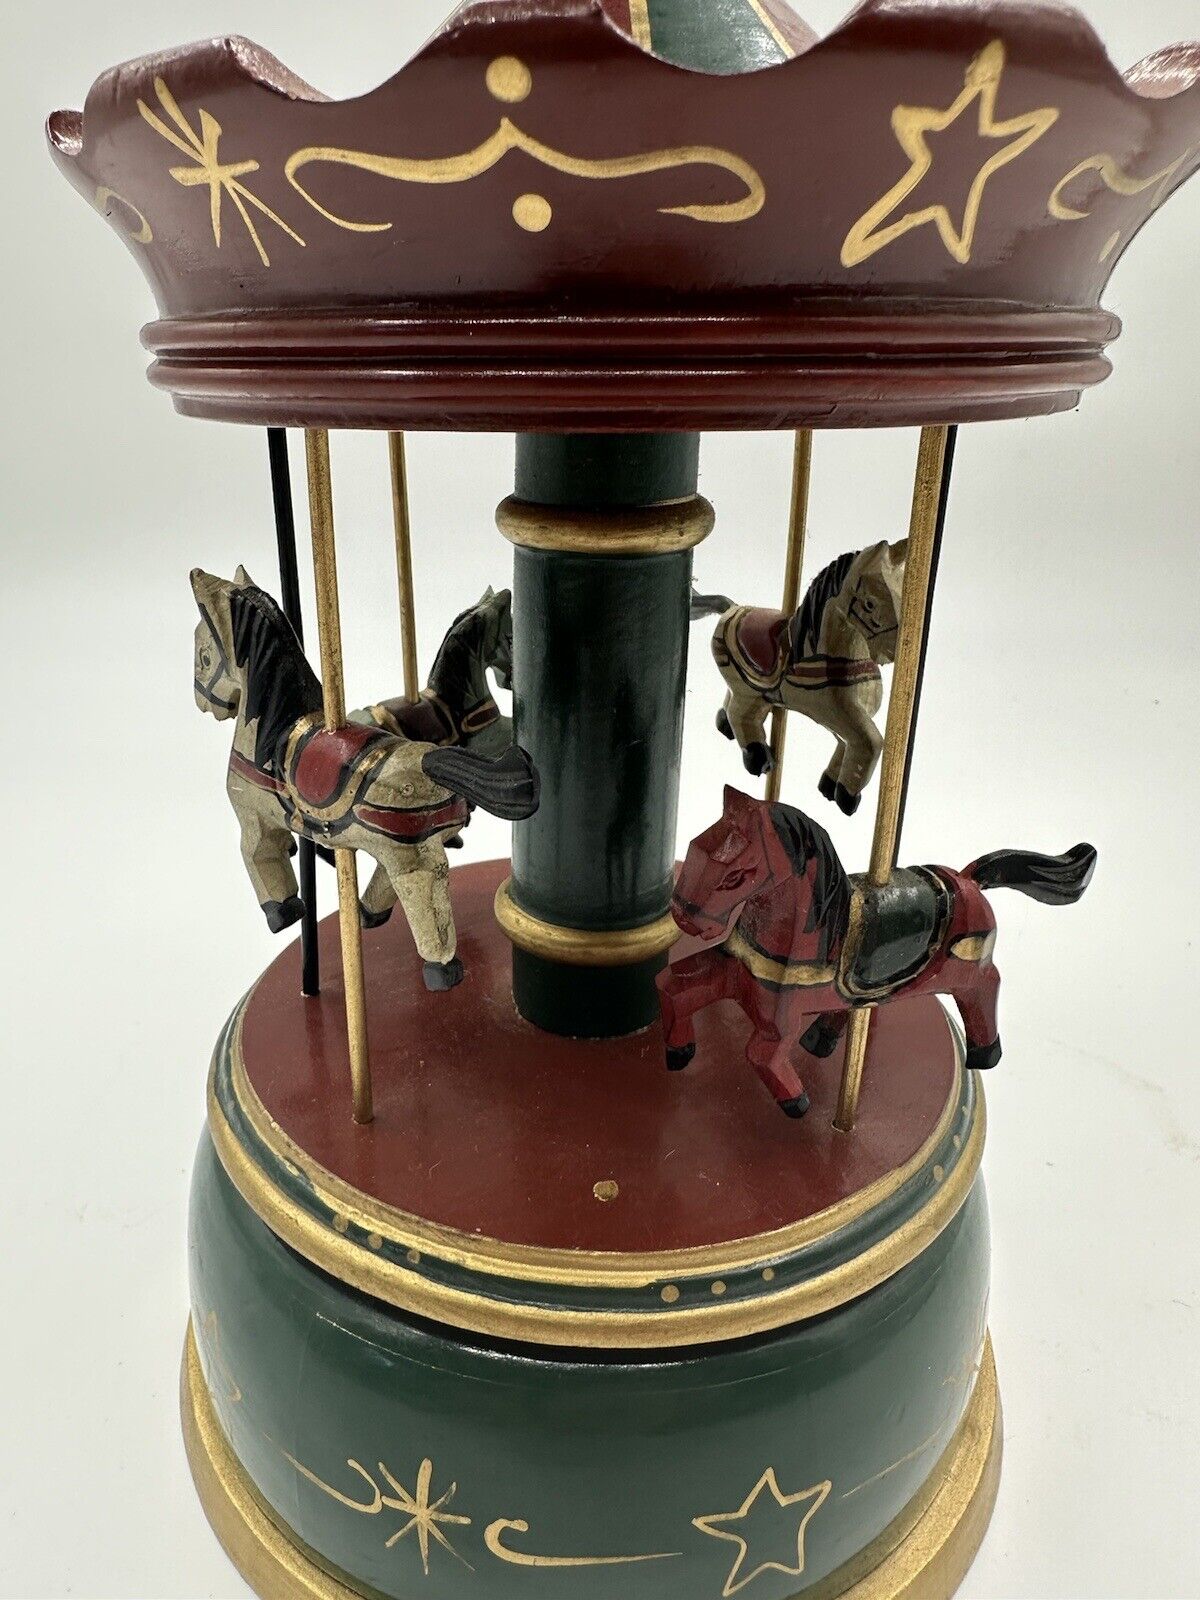 Vintage Carousel Merry-Go-Round Music Box Carved Wood Horses ca 1970s-80s